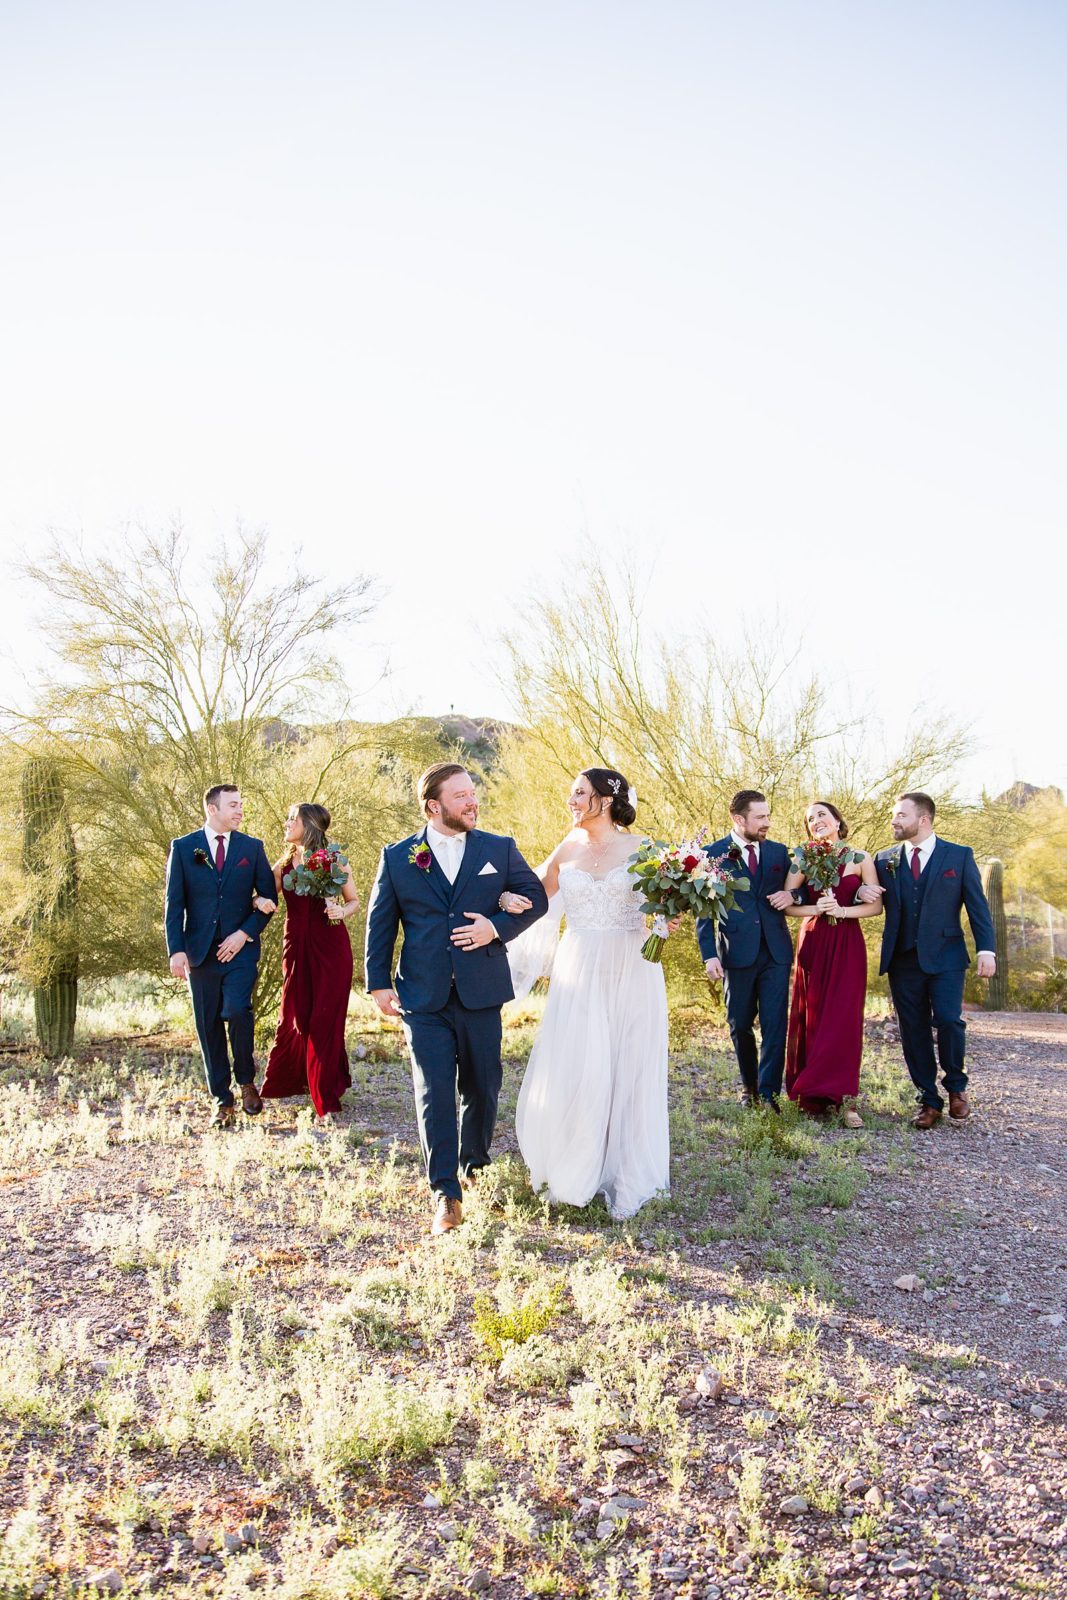 Bridal party laughing together at Arizona Heritage Center at Papago Park wedding by Tempe wedding photographer PMA Photography.